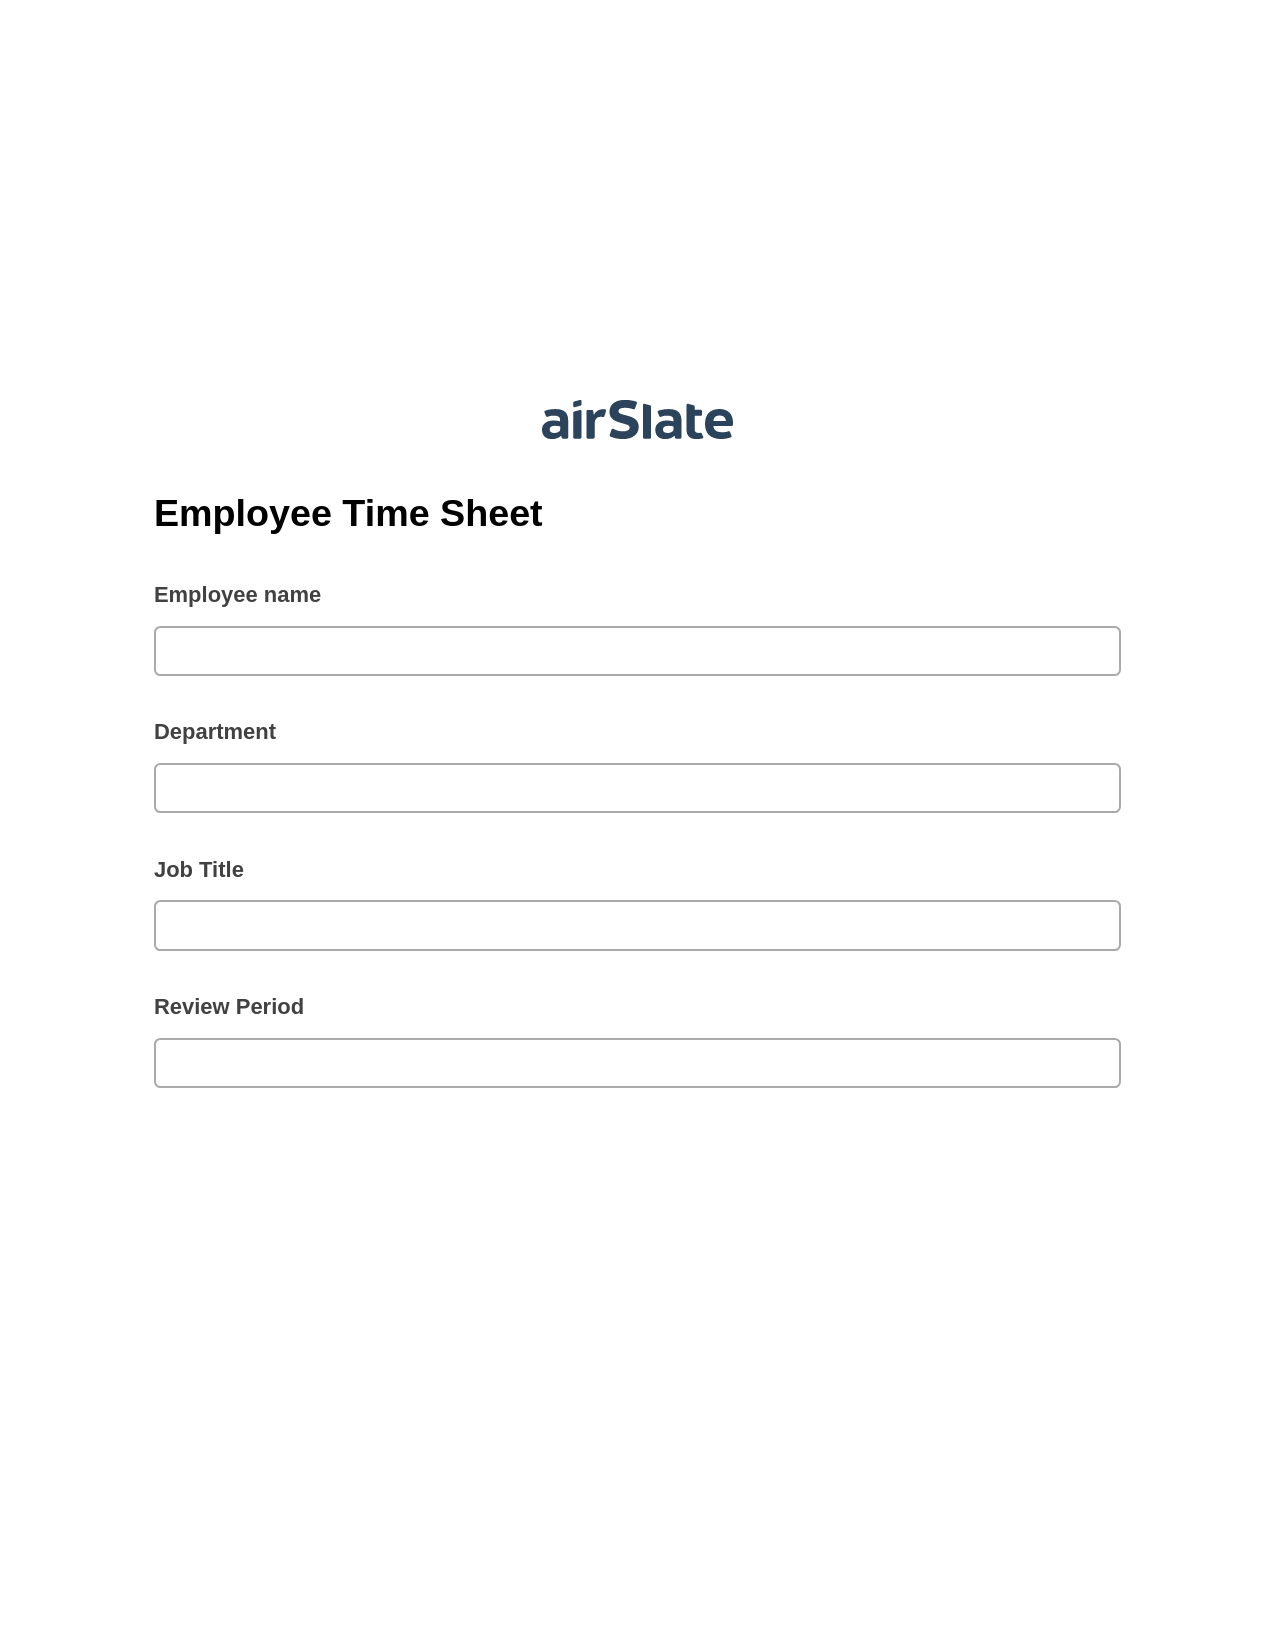 Employee Time Sheet Pre-fill Dropdowns from Airtable, Update Audit Trail Bot, Export to Google Sheet Bot